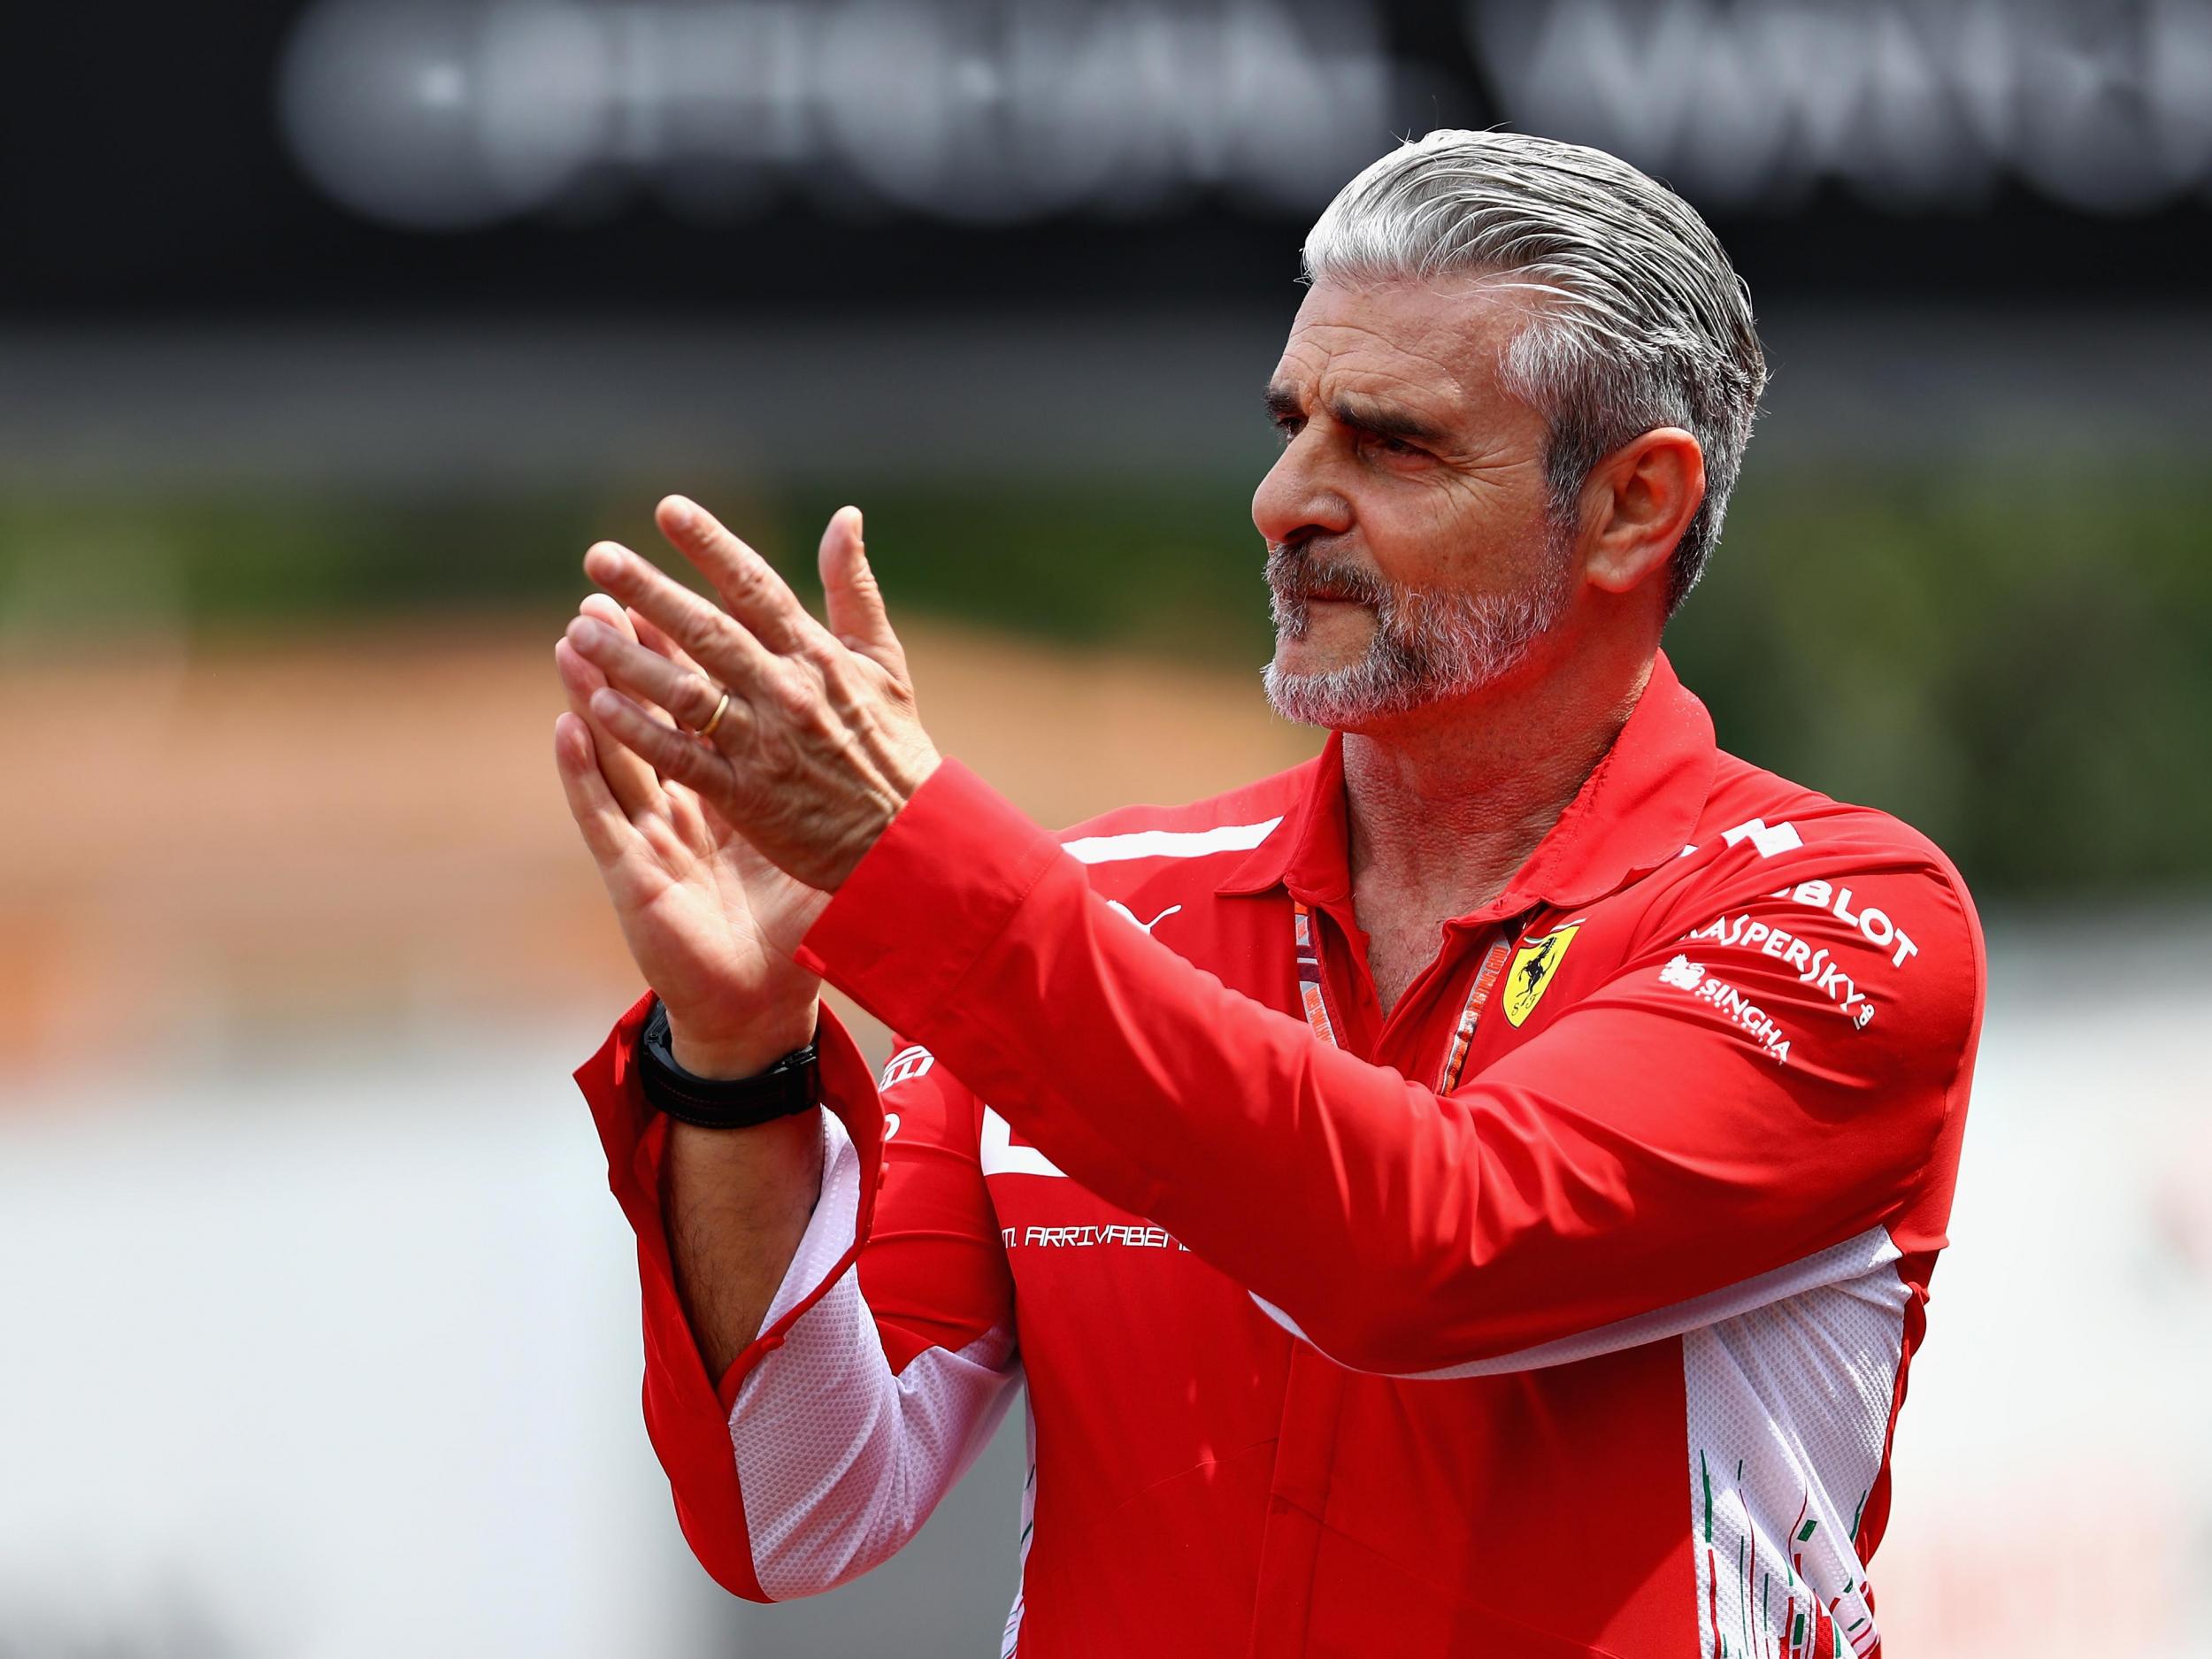 Maurizio Arrivabene failed to deliver a constructors title during his time